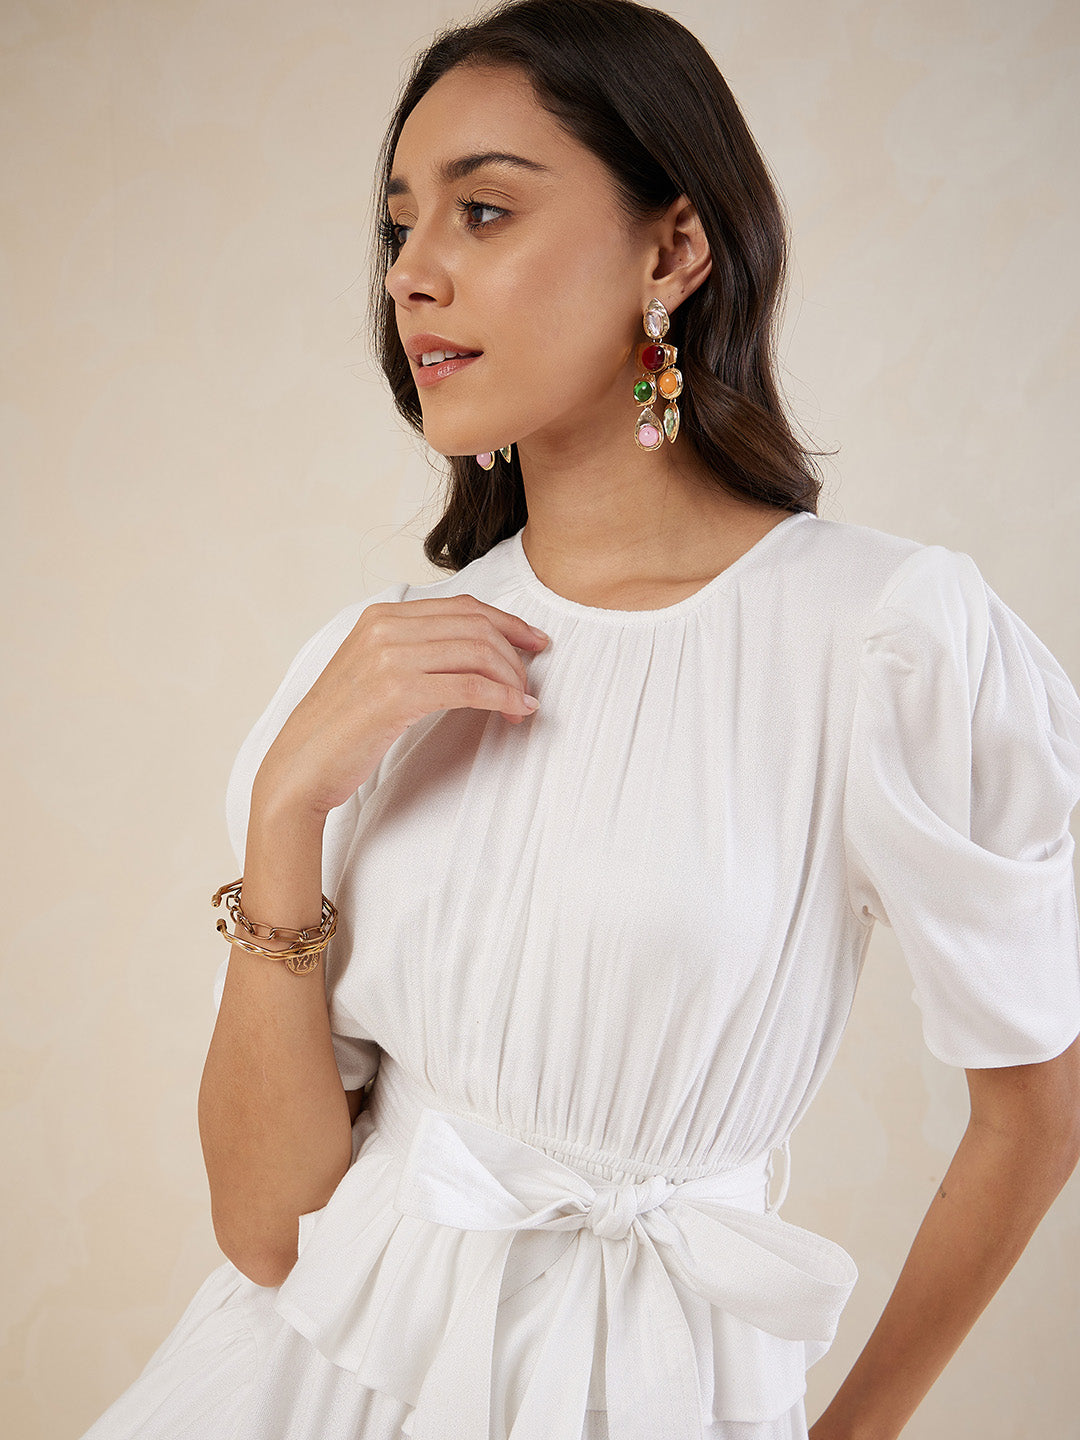 Off White Asymmetric Tiered Belted Midi Dress